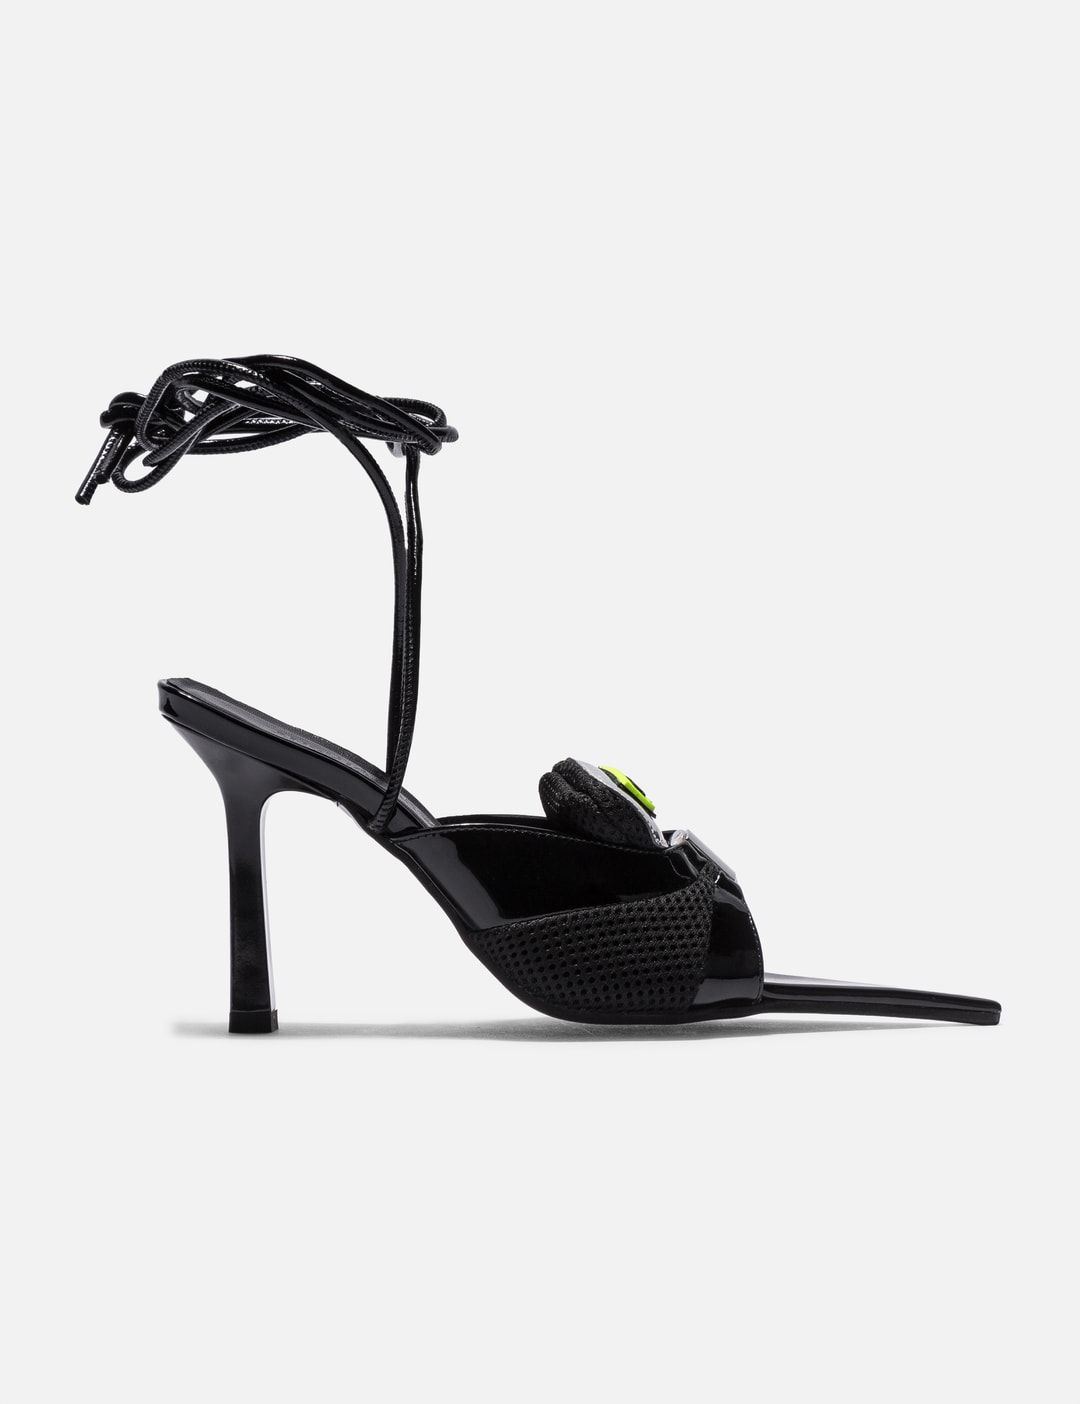 ANCUTA SARCA - Sword Black Sandals With Ankle Straps | HBX - Globally ...